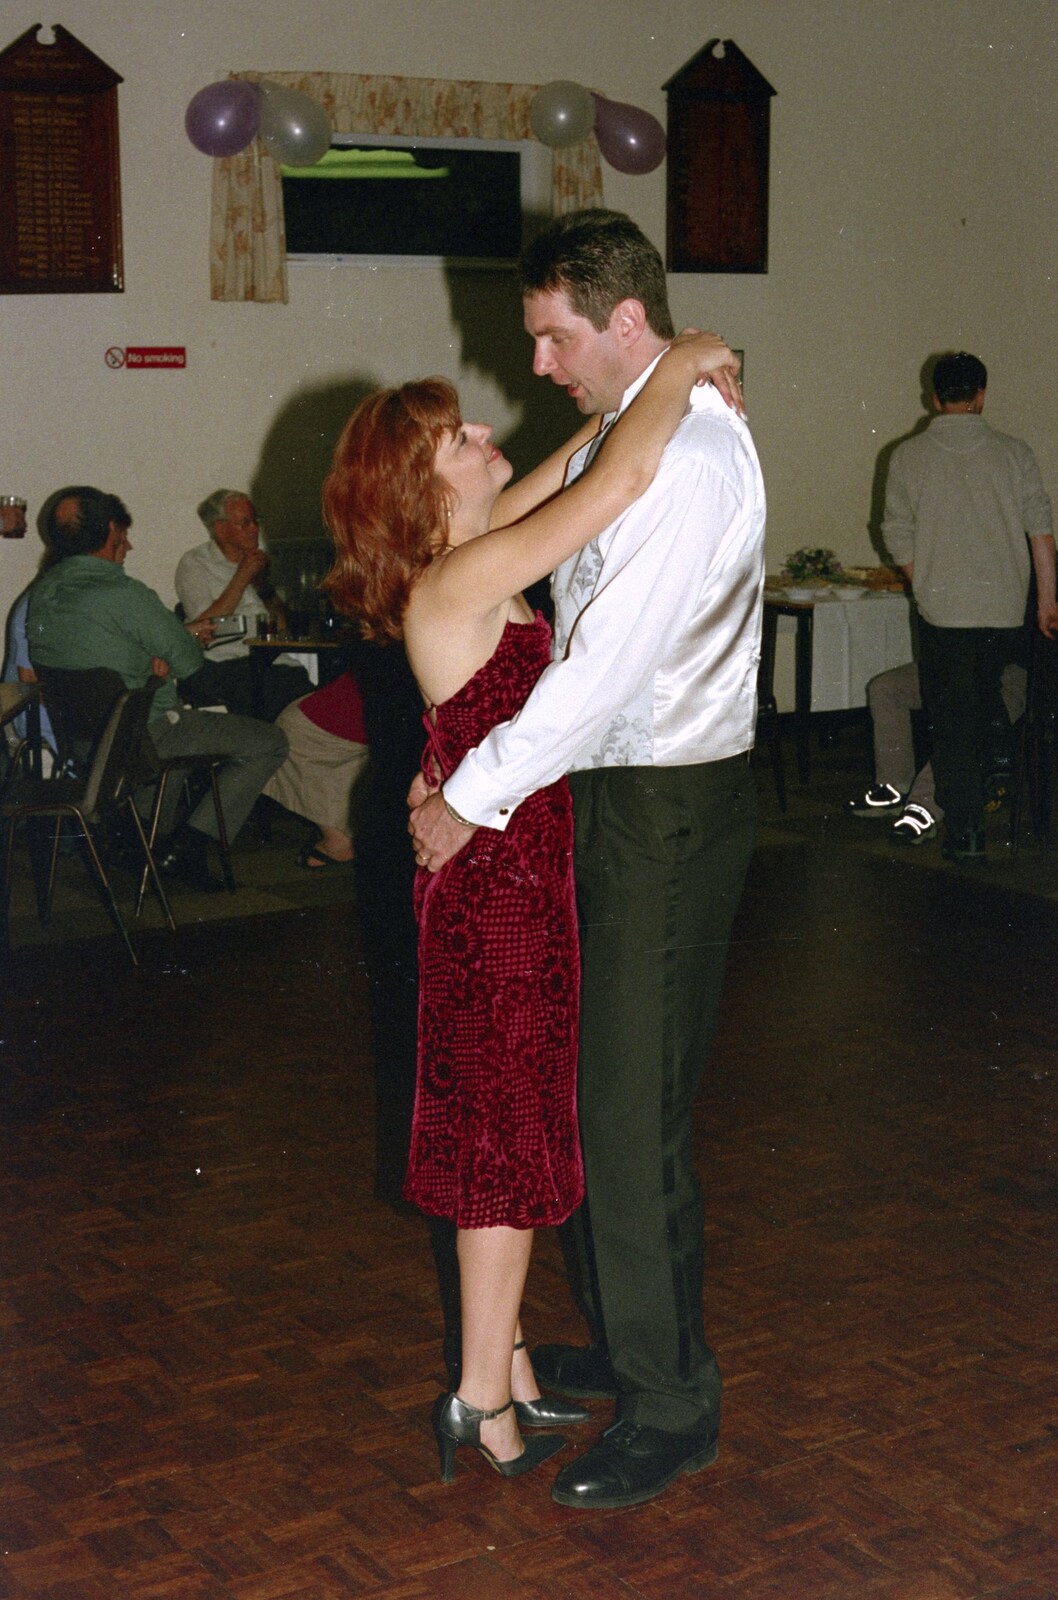 Michelle and Sean from Sean and Michelle's Wedding, Bashley FC, New Milton - 12th August 2000